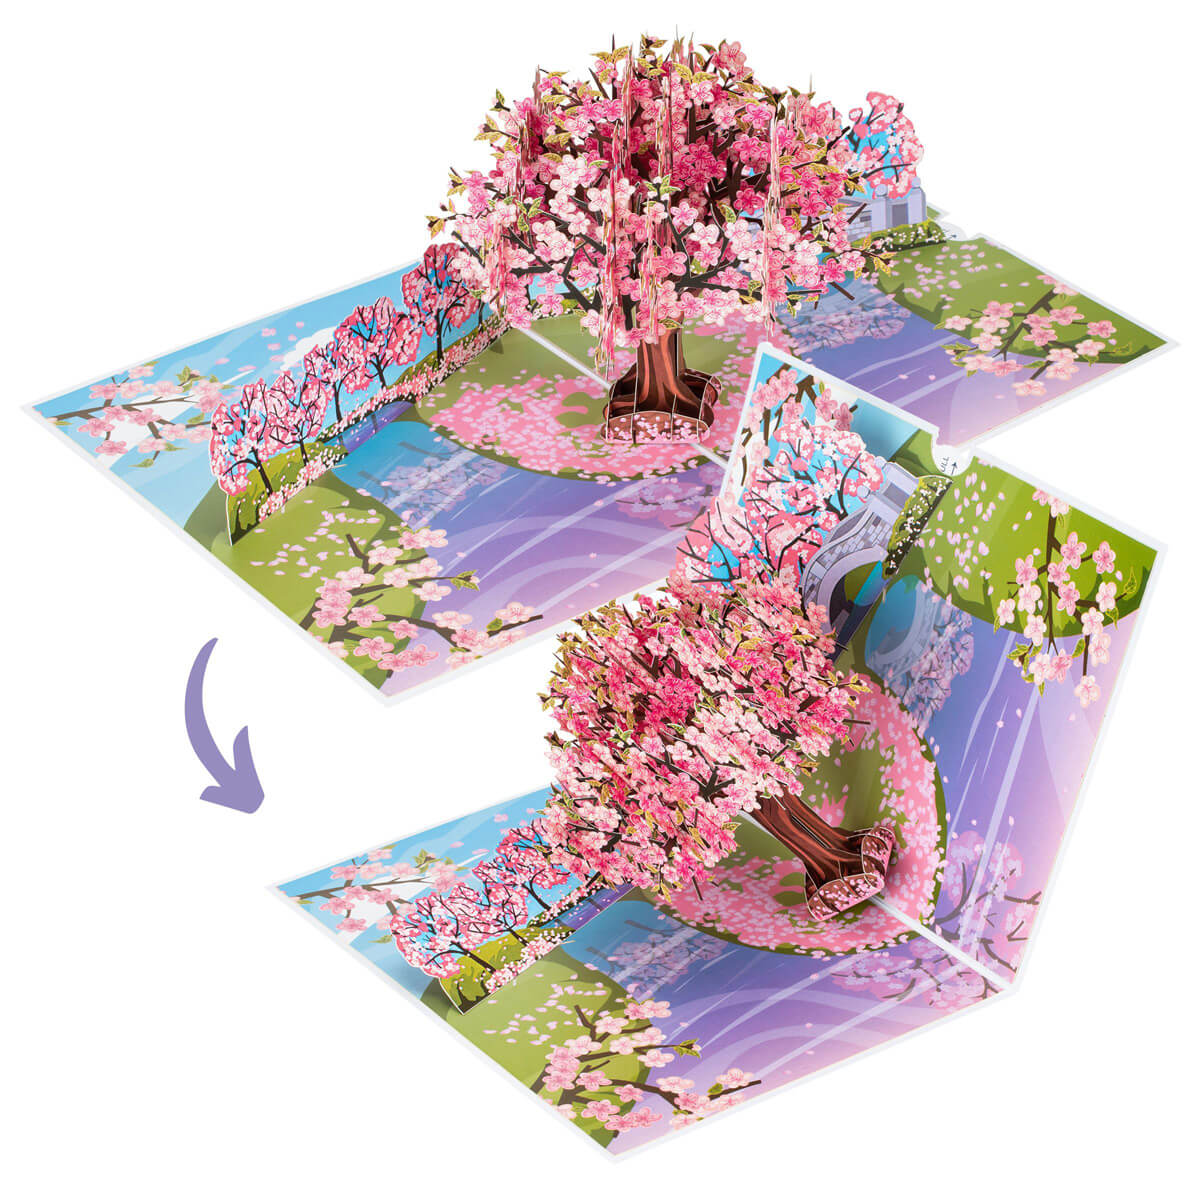 Pink Cherryblossom Tree Pop Up Card close up image - perfect for Birthday cards, Mothers Day Cards, Anniversary Cards, Valentines Day and more